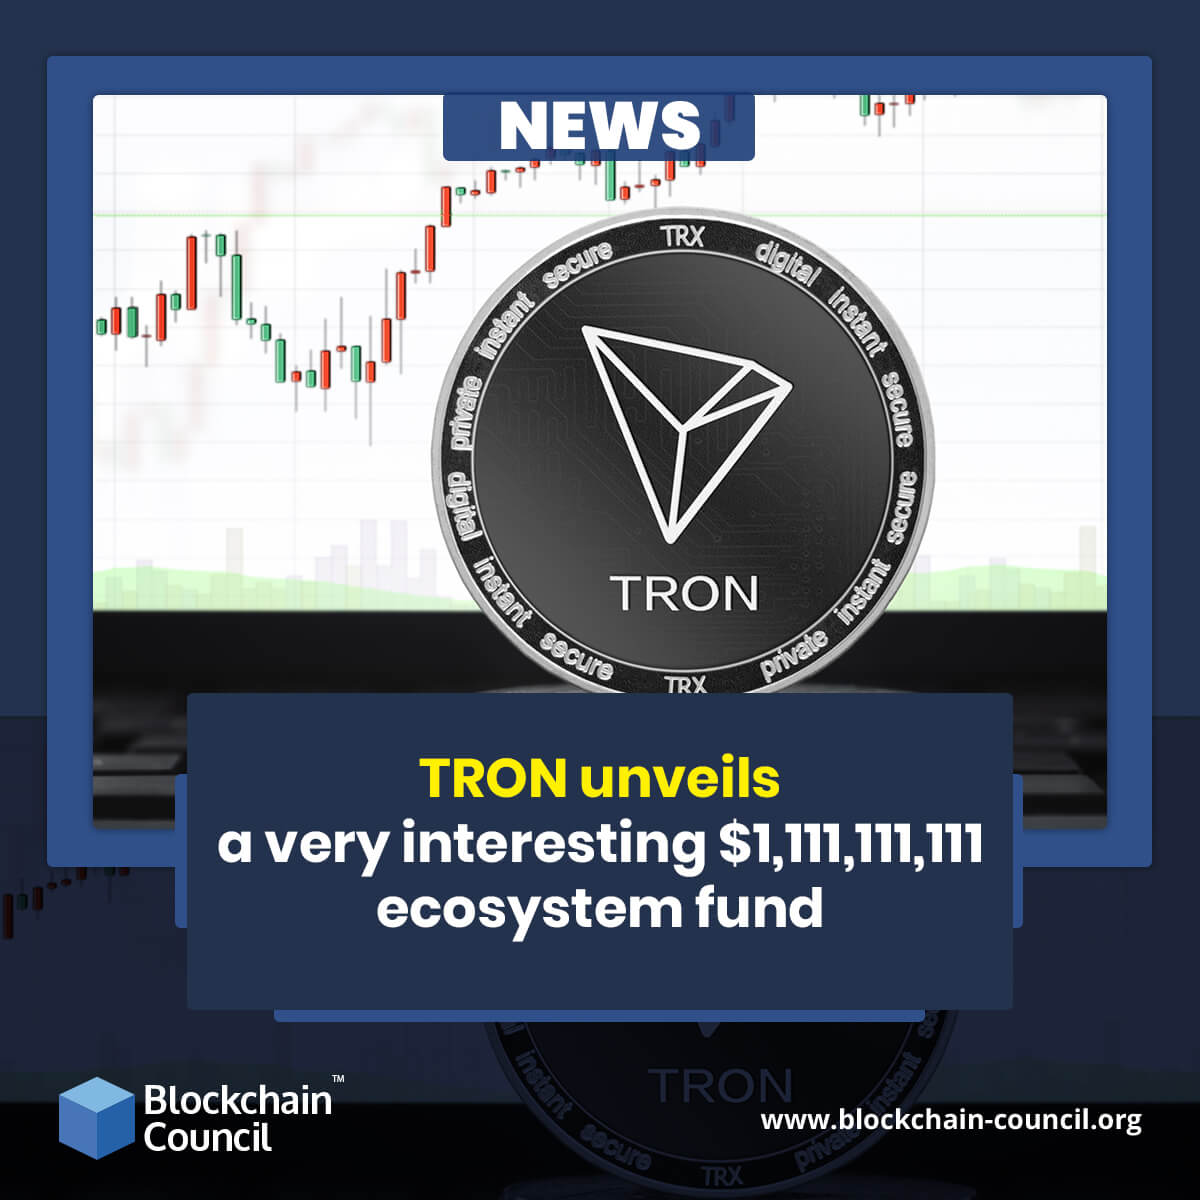 TRON unveils a very interesting $1,111,111,111 ecosystem fund